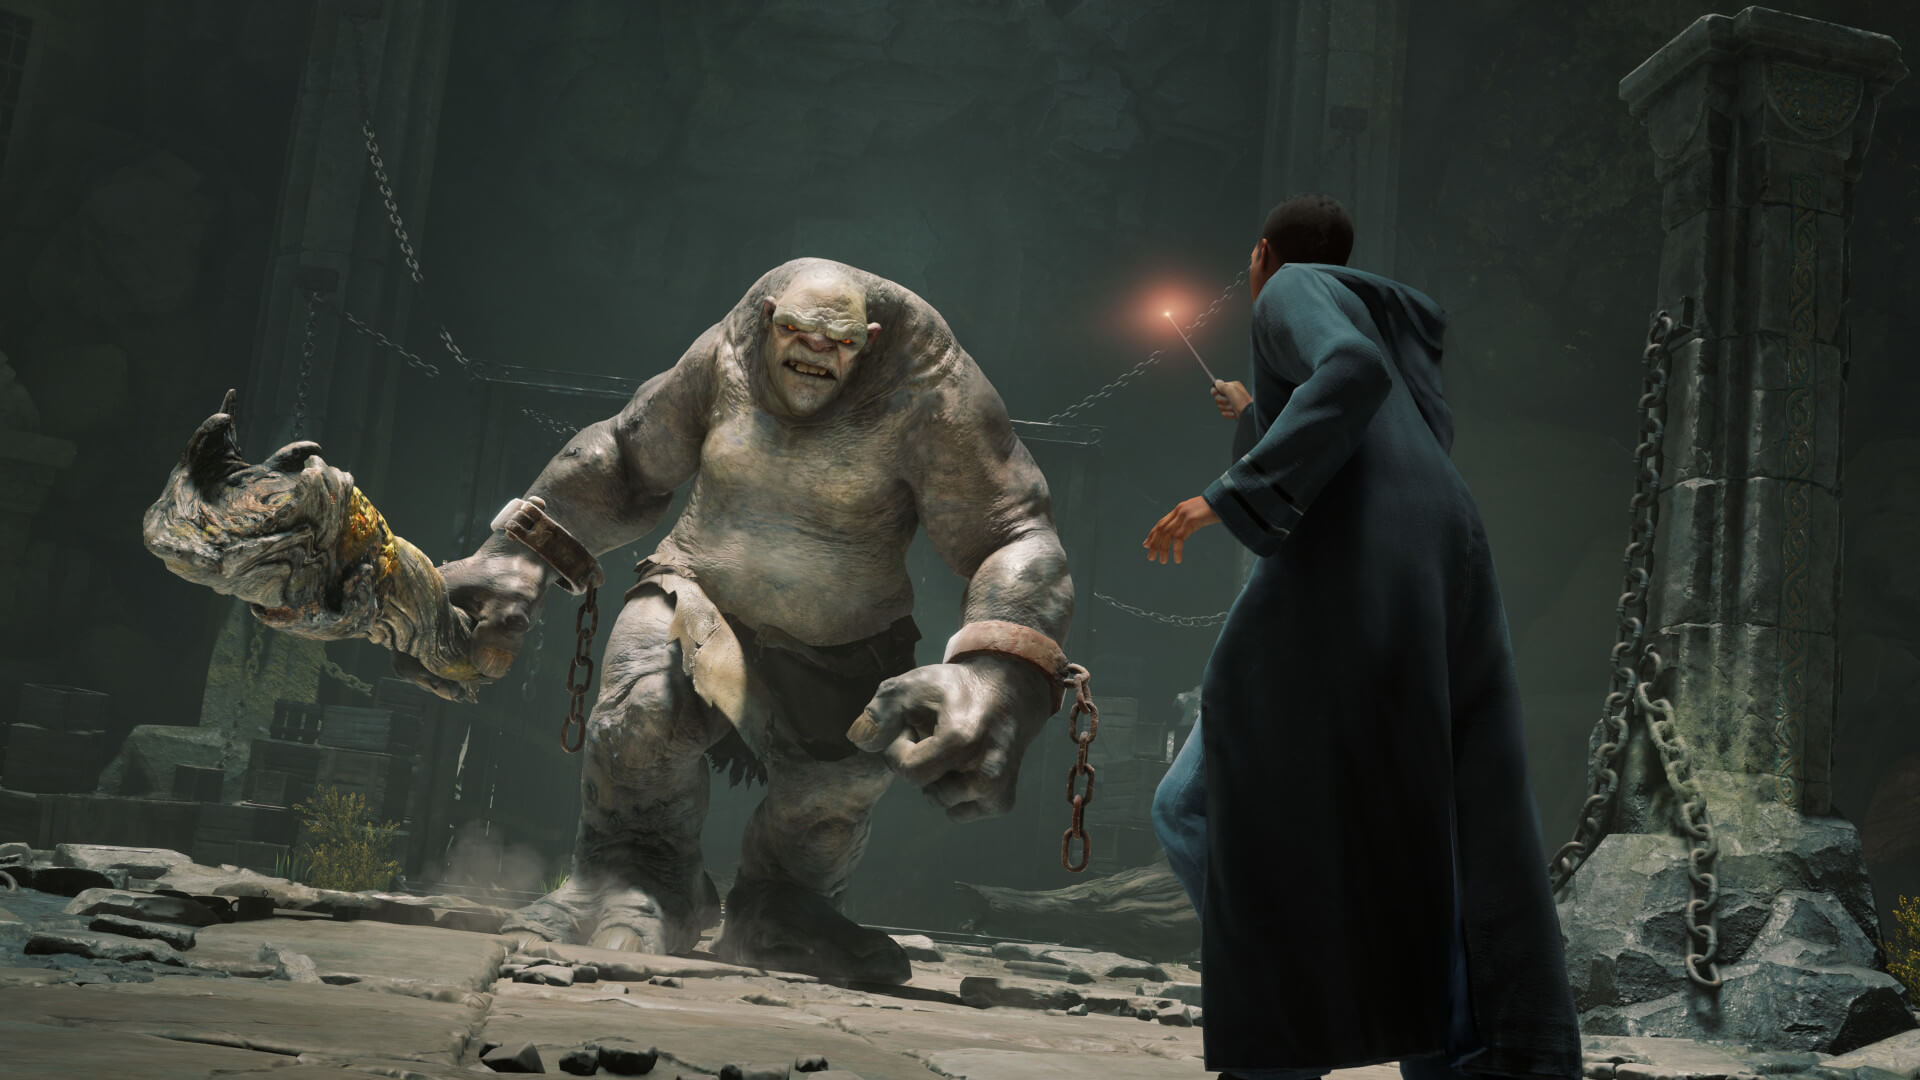 A student facing off against a troll at Hogwarts Legacy, which has performed very well in the Circana data (NPD) for March 2023